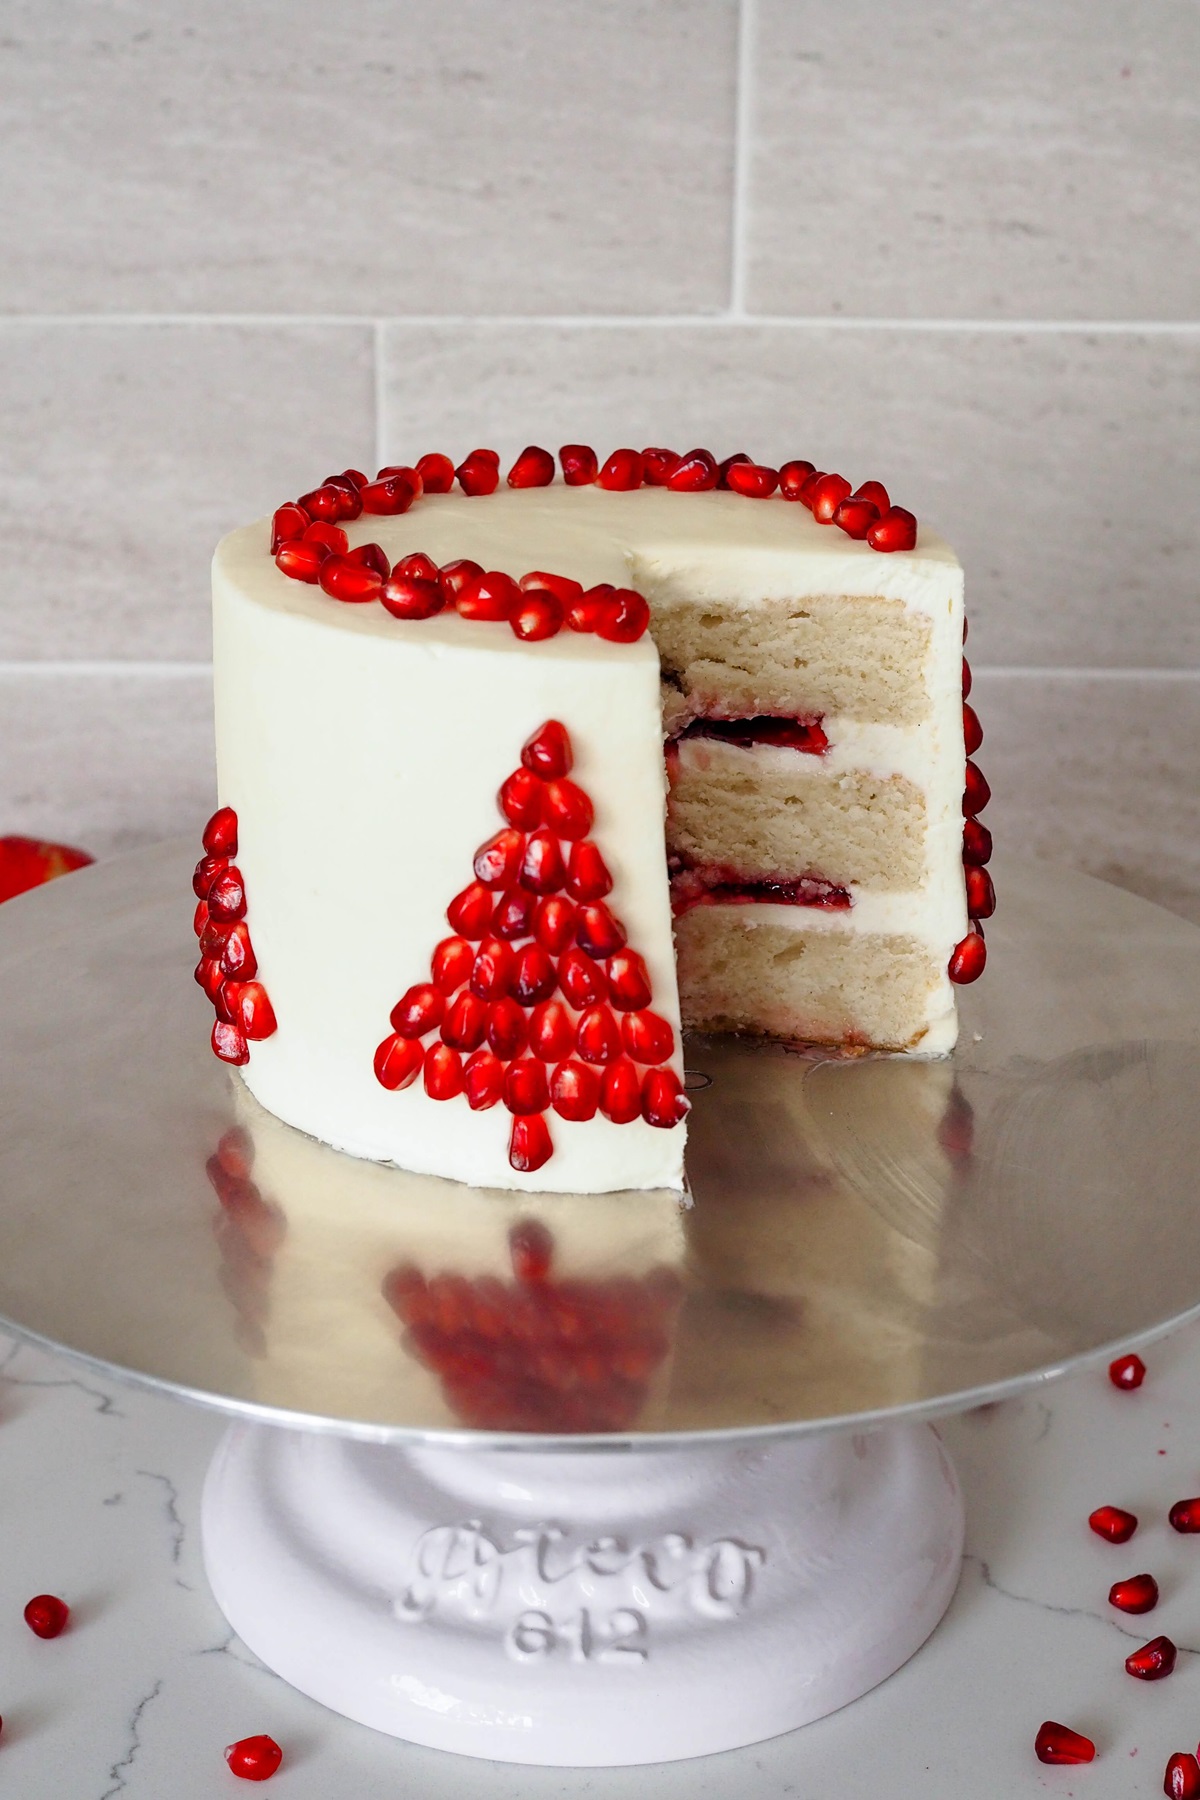 I Used Pomegranate Arils To Make Christmas Trees On The Side Of This White Chocolate Pomegranate Cake, And It Turned Out So Cute